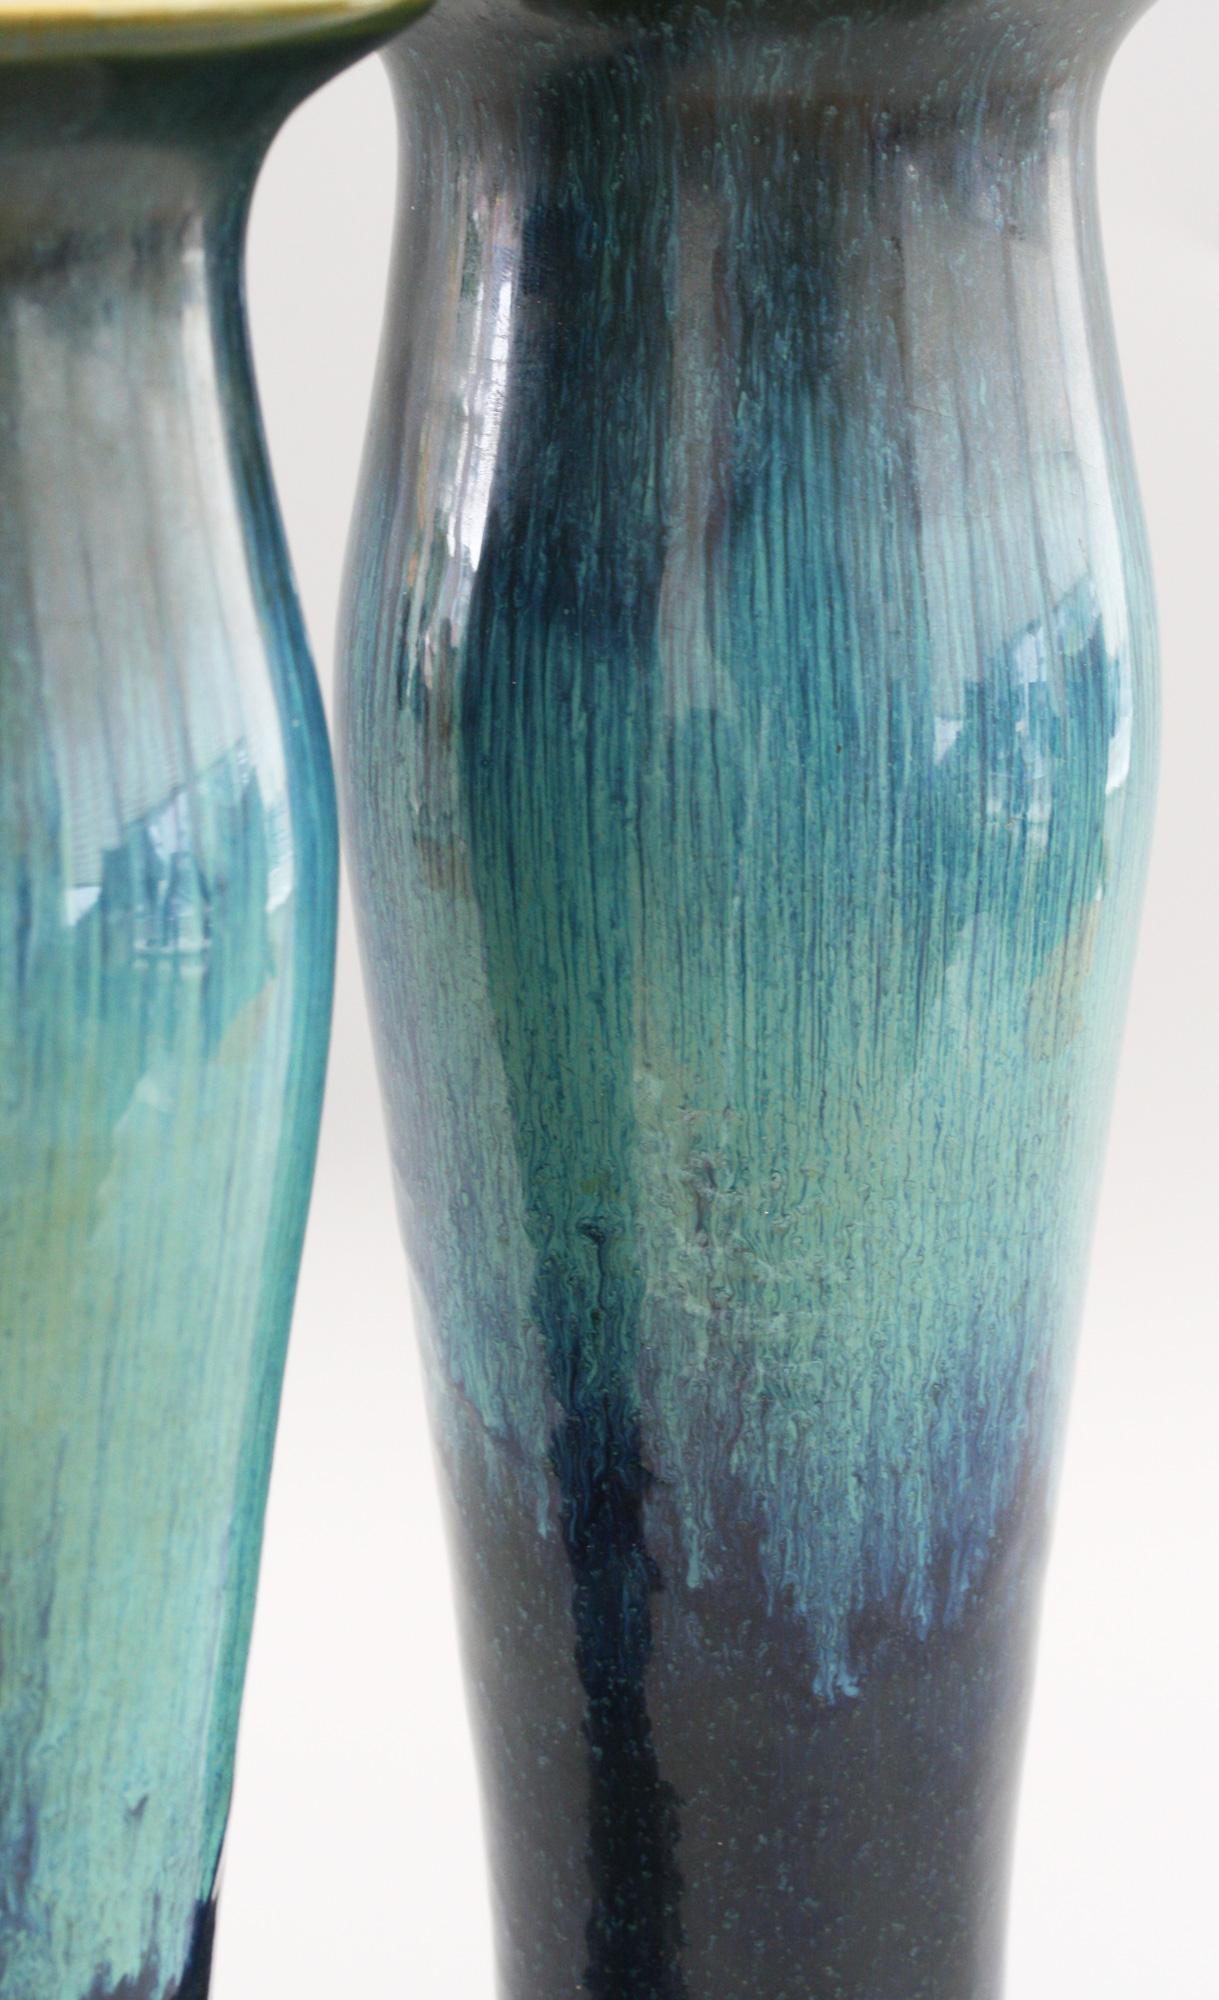 An exceptional pair of Art Nouveau tulip shaped art pottery vase decorated in streaked blue glazes dating between 1909 and 1922. The vases stand on wide rounded slightly domed feet the tall slender tulip shaped bodies with a slightly narrowing neck